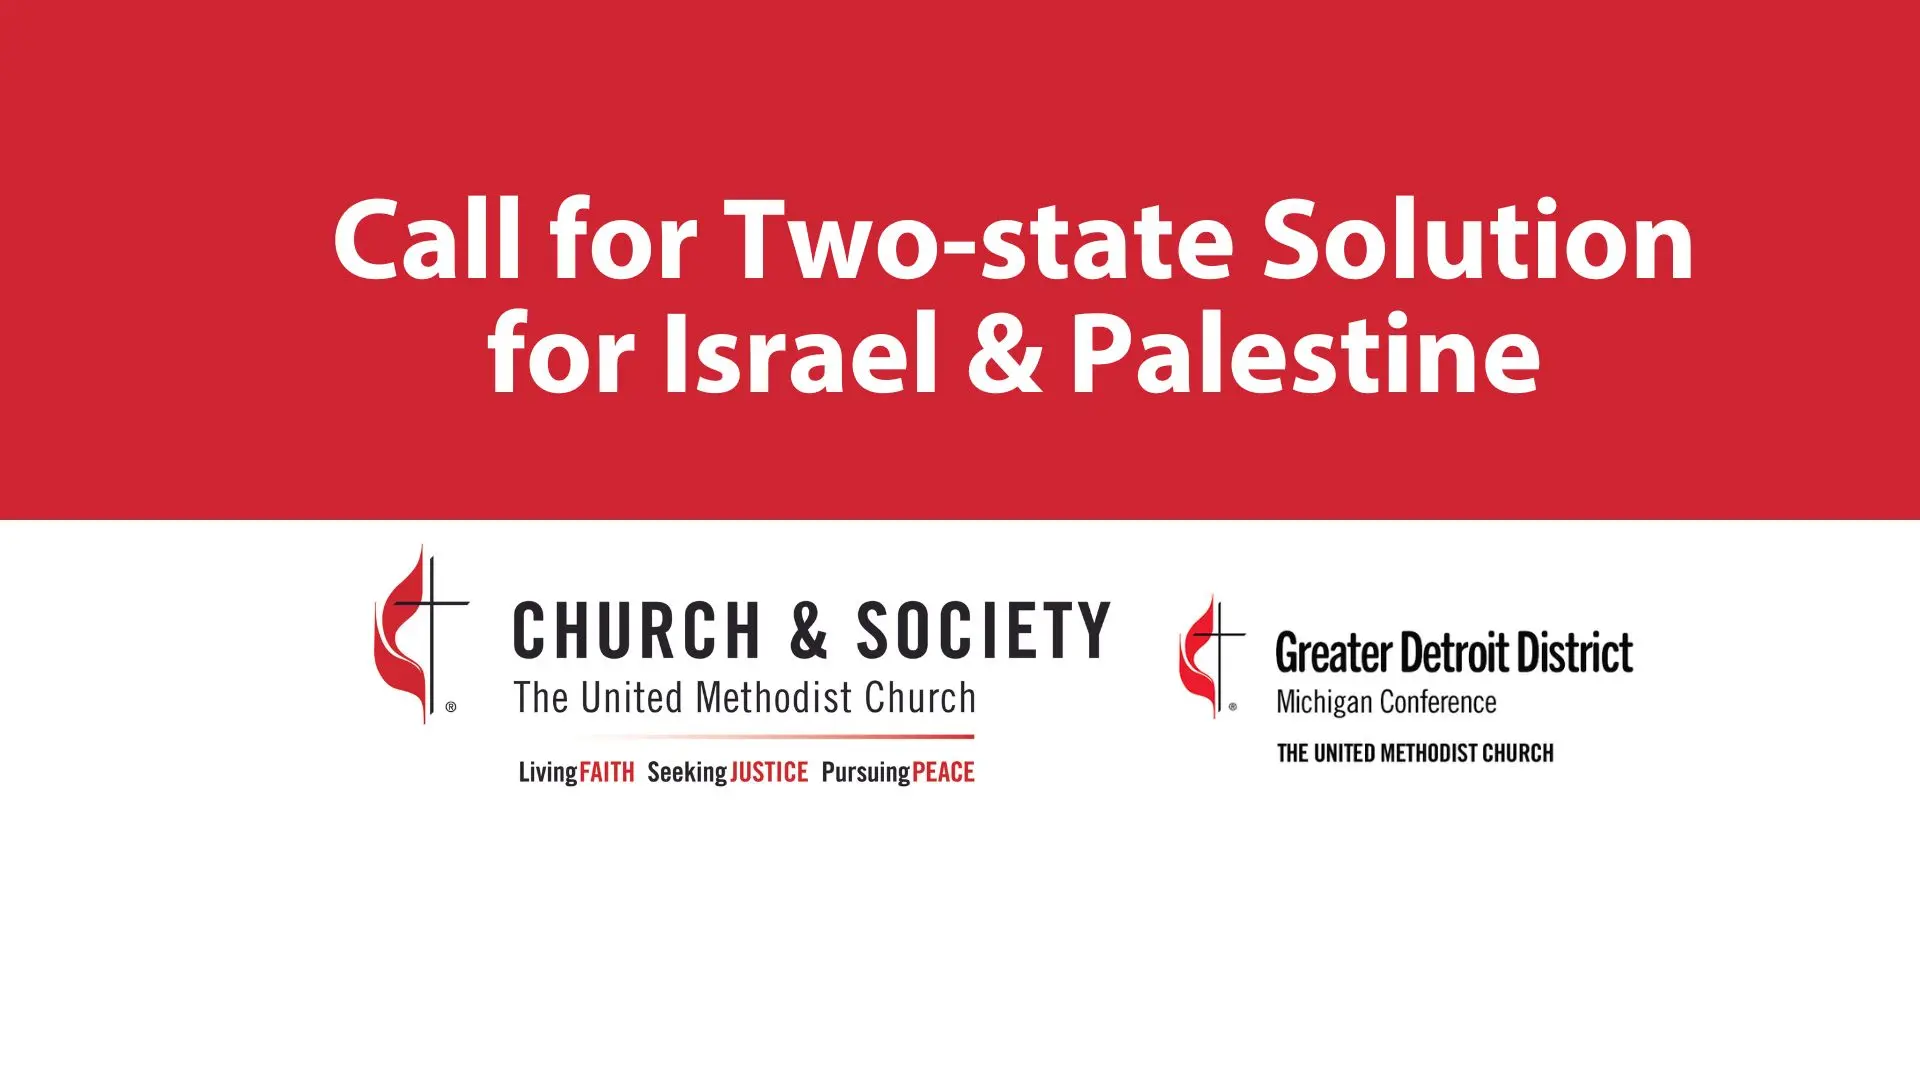 Call for Two-state Solution: Church & Society